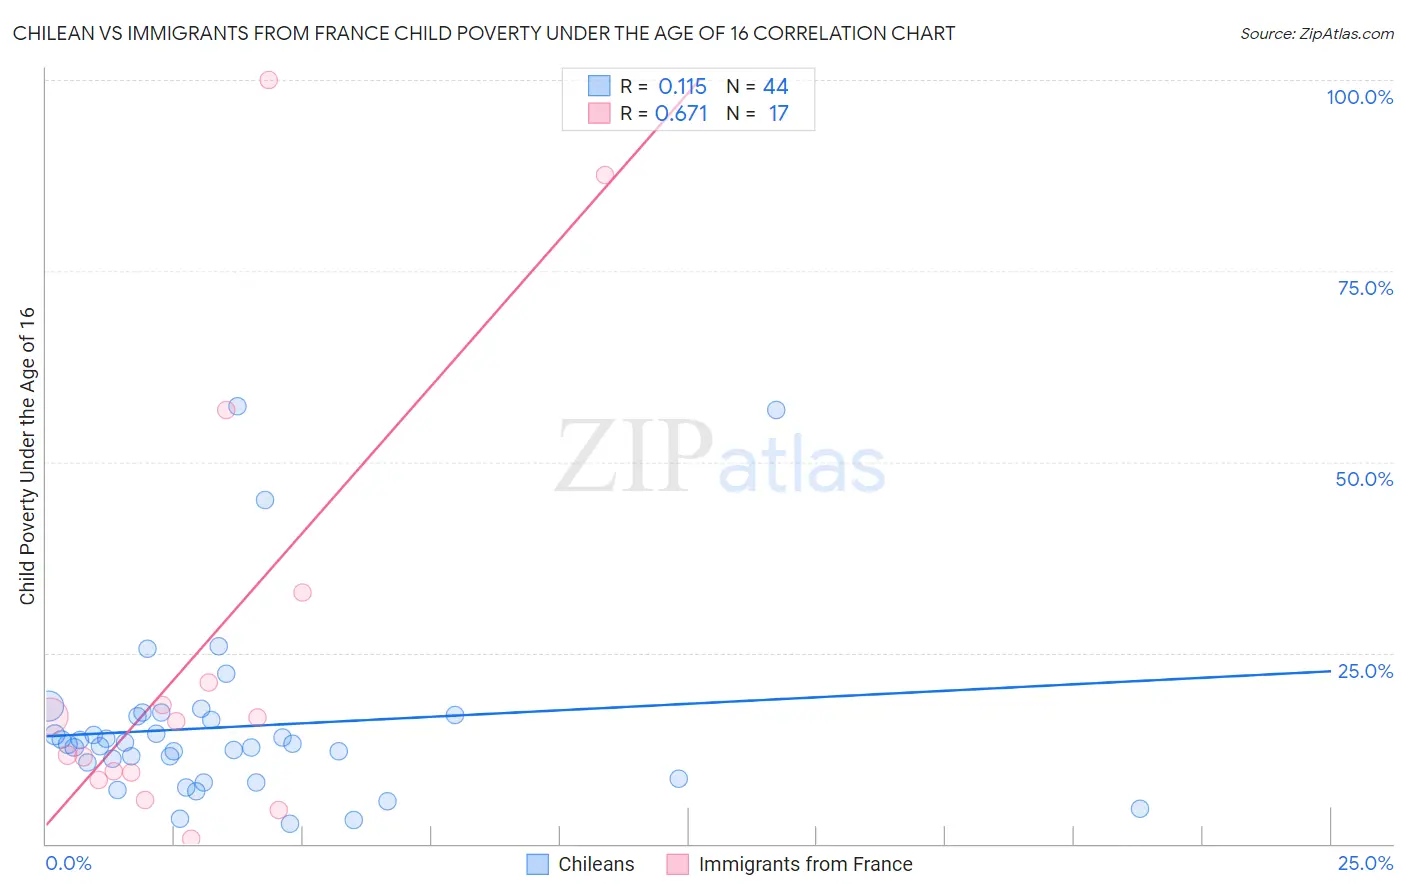 Chilean vs Immigrants from France Child Poverty Under the Age of 16